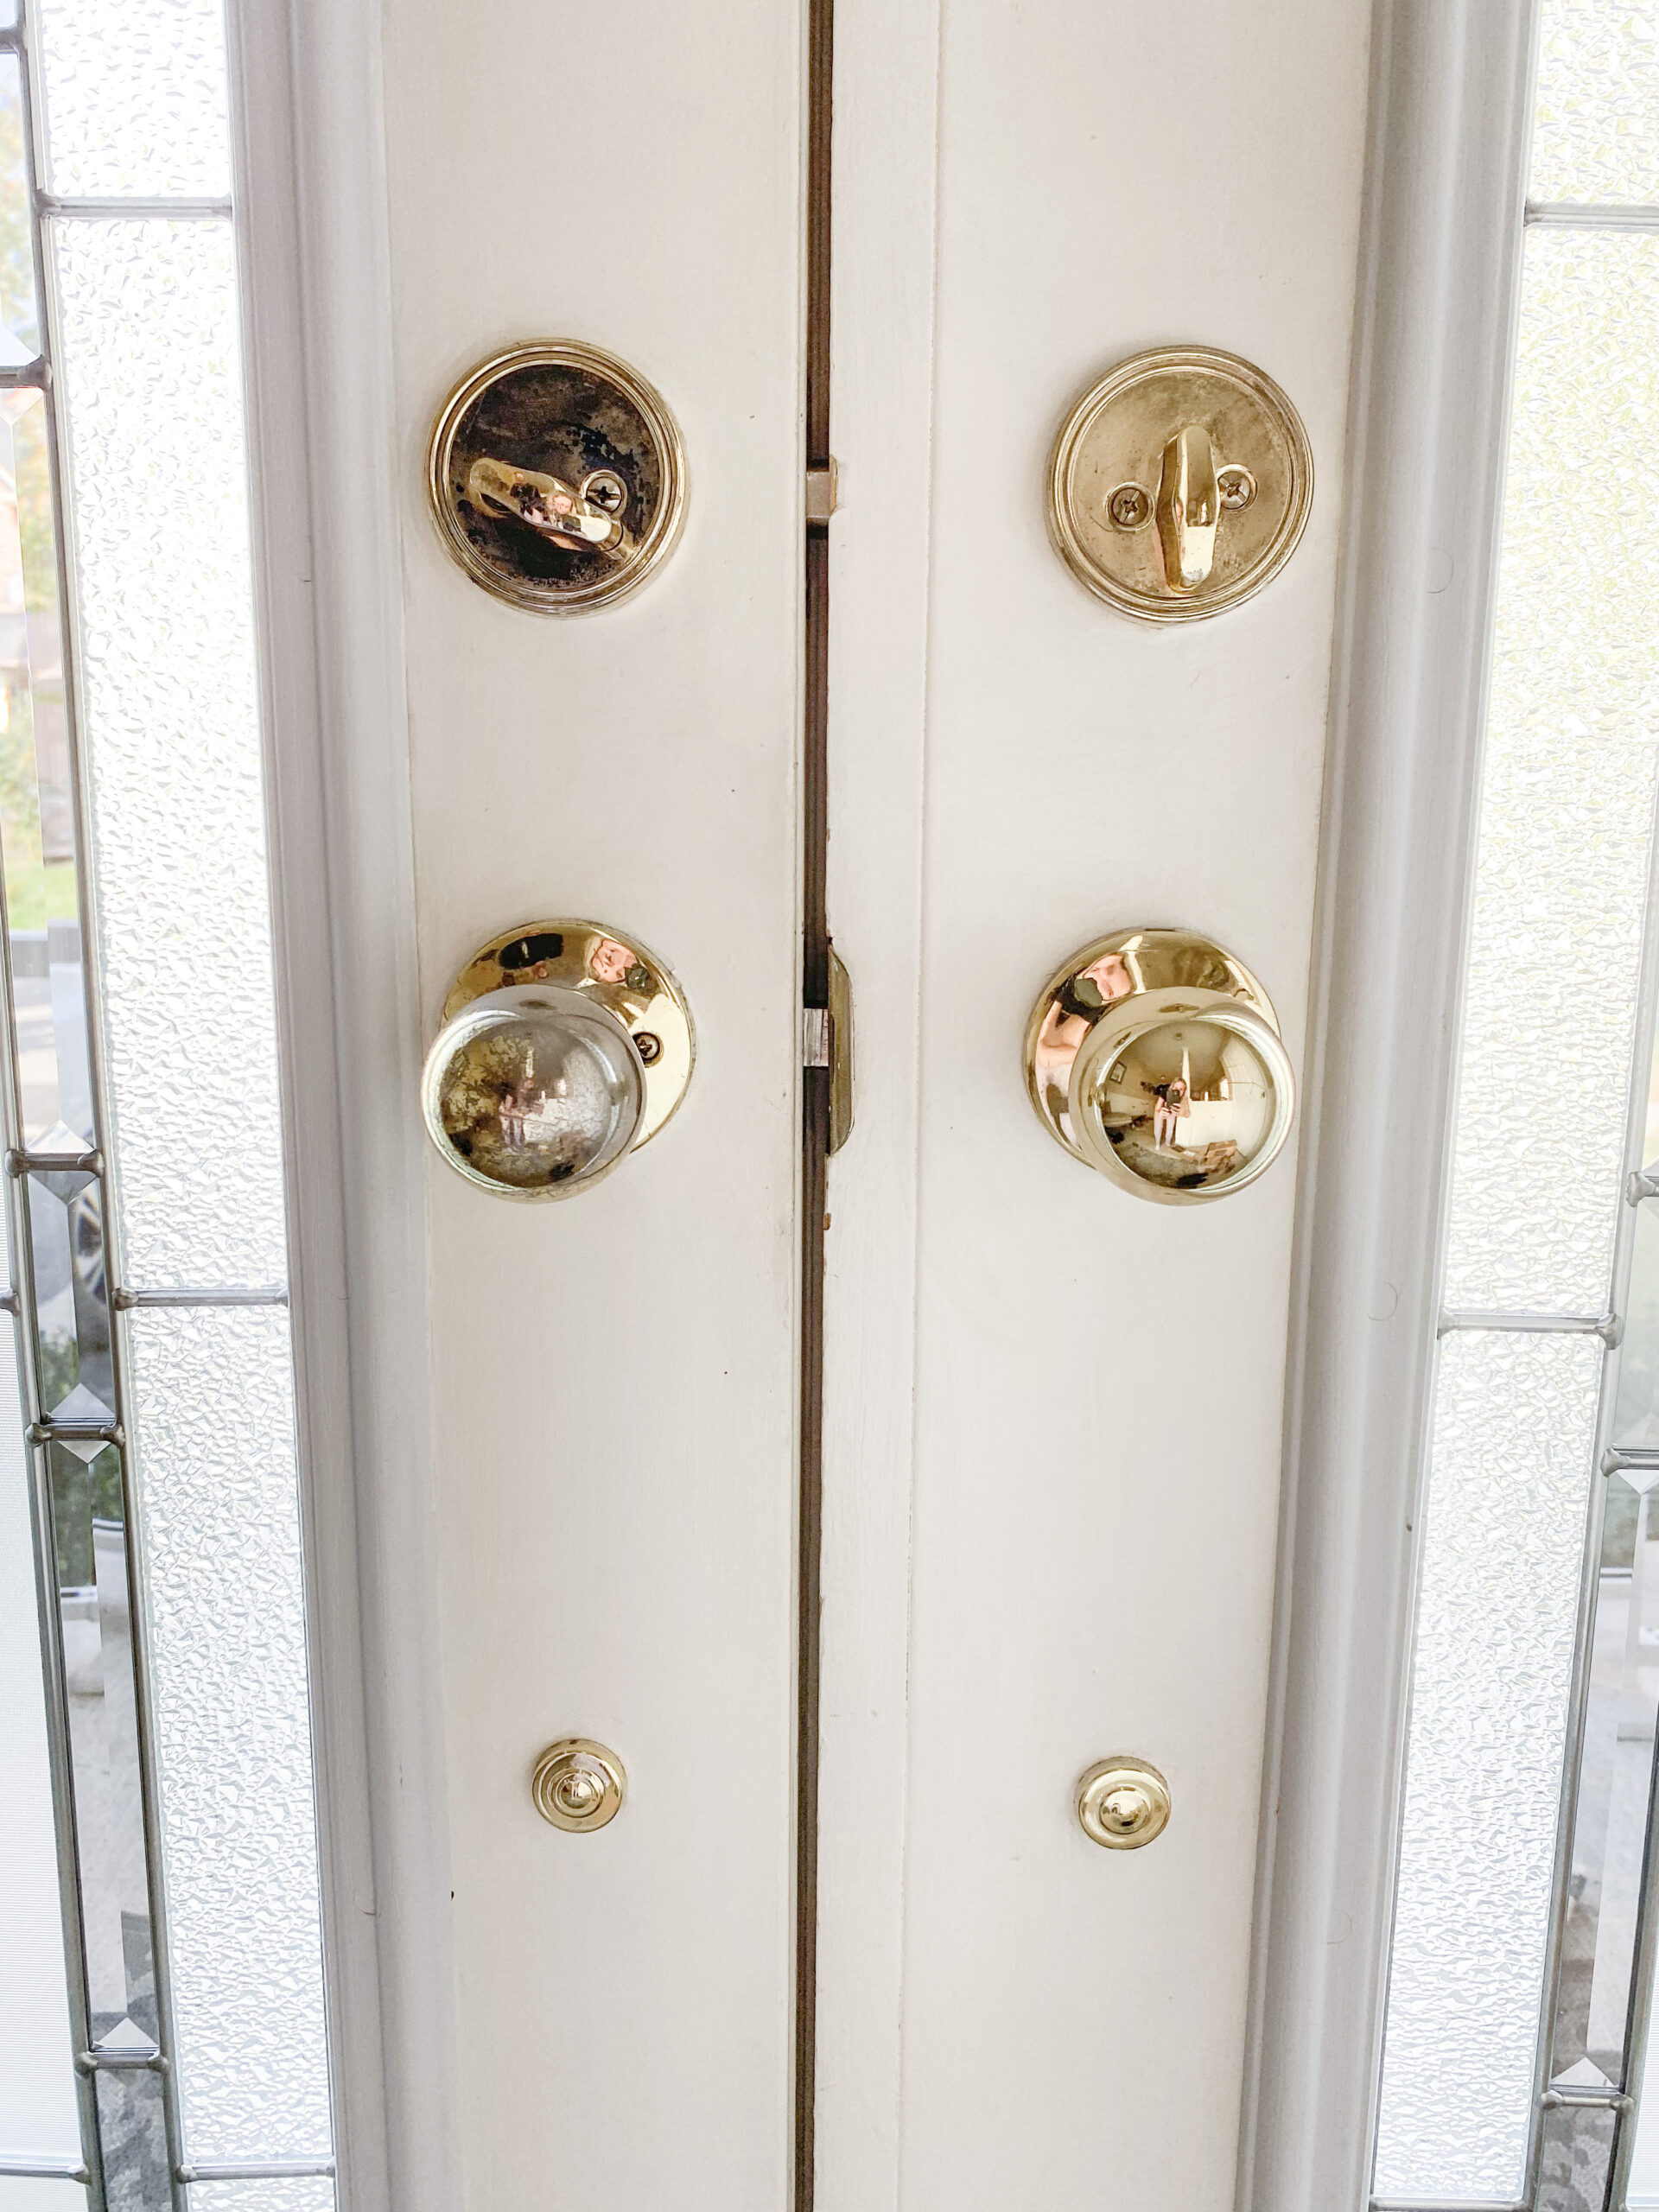 Schlage Door Handles (before and after) on Livin' Life with Style